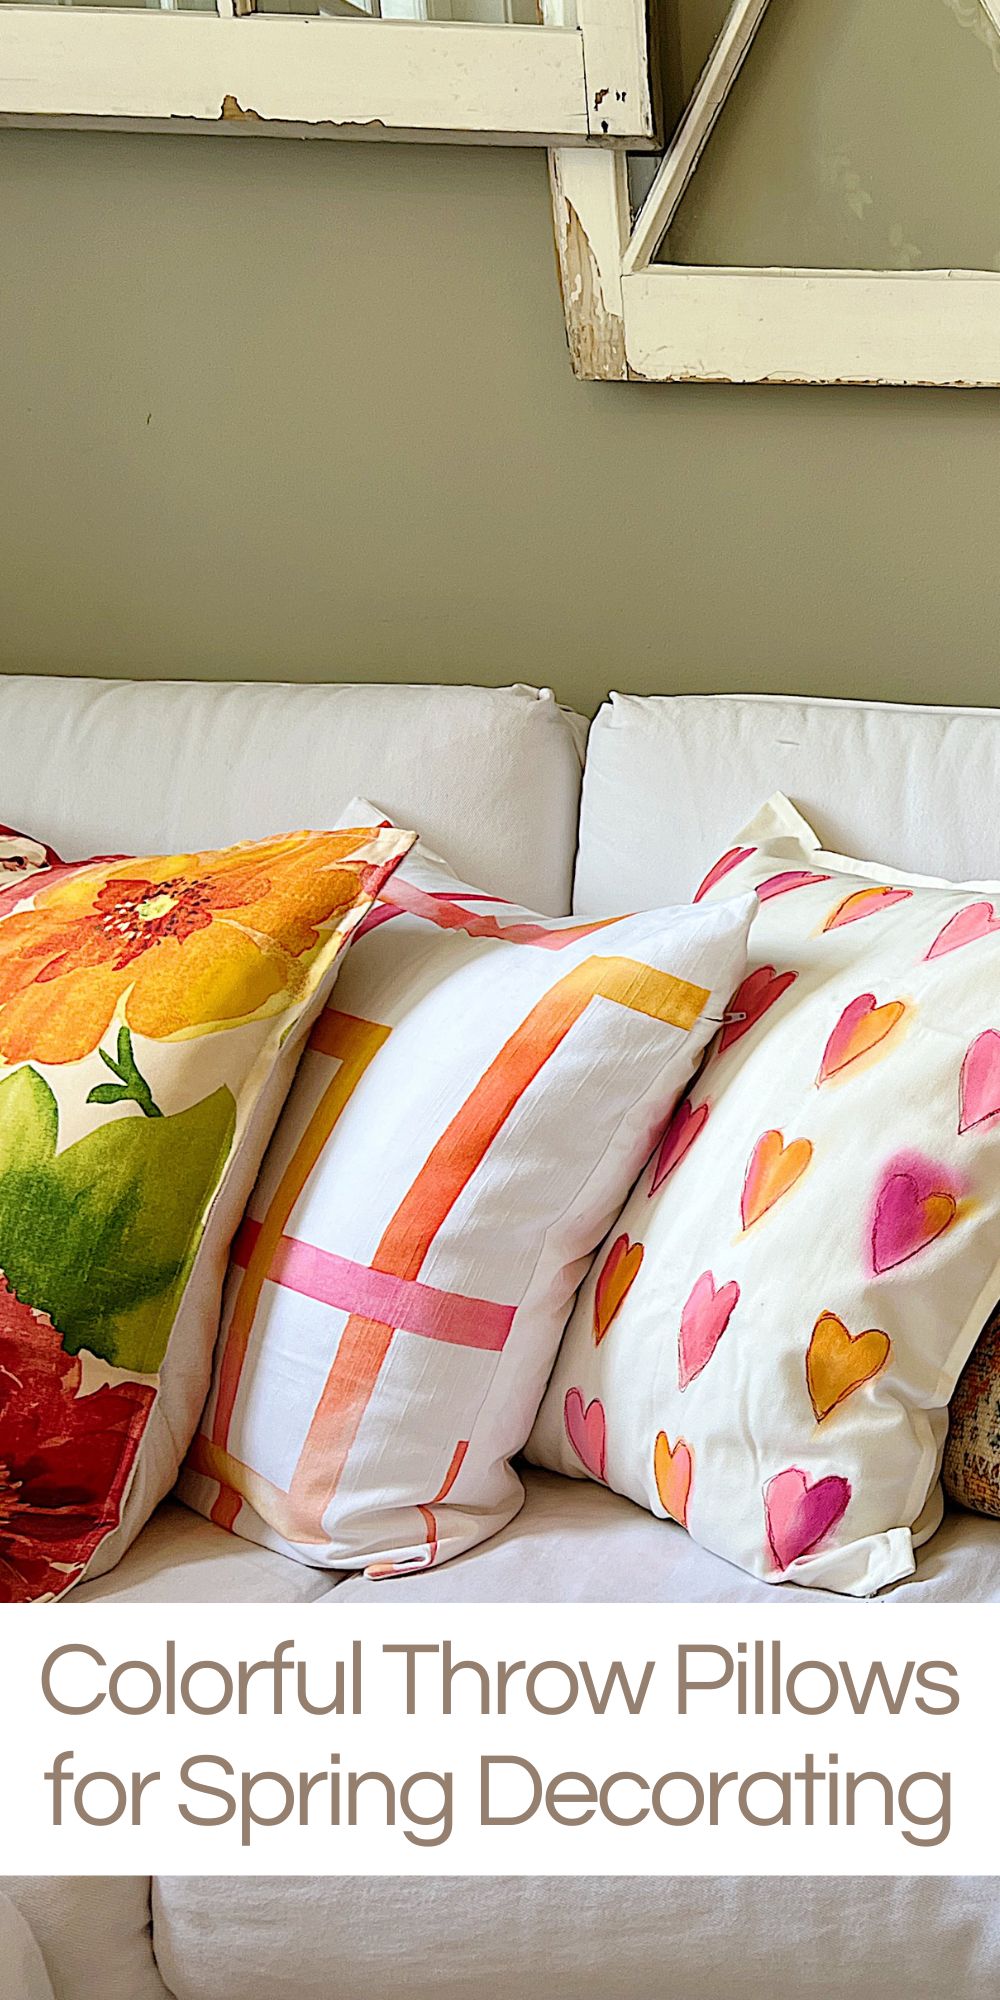 Spring is the season to refresh and add a splash of color to your home decor. One way to do this is with colorful throw pillows.